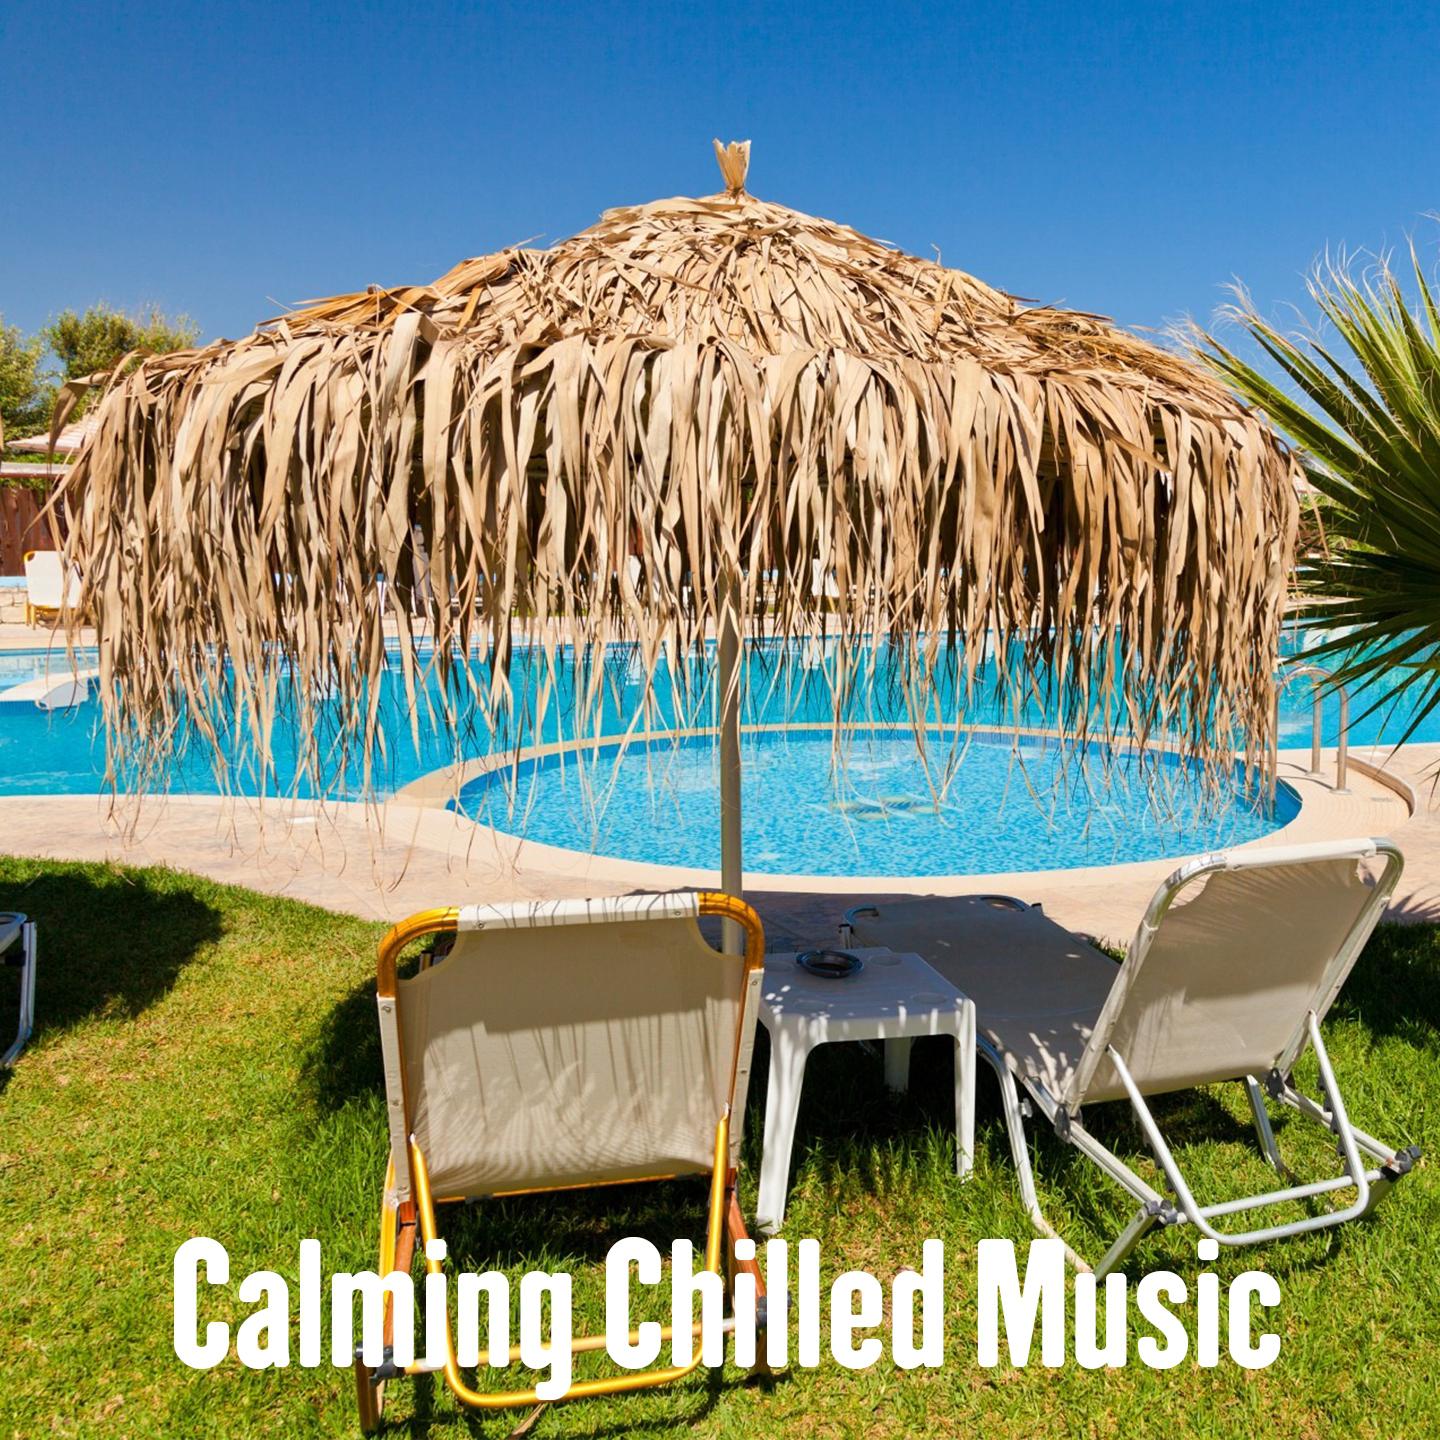 Calming Chilled Music